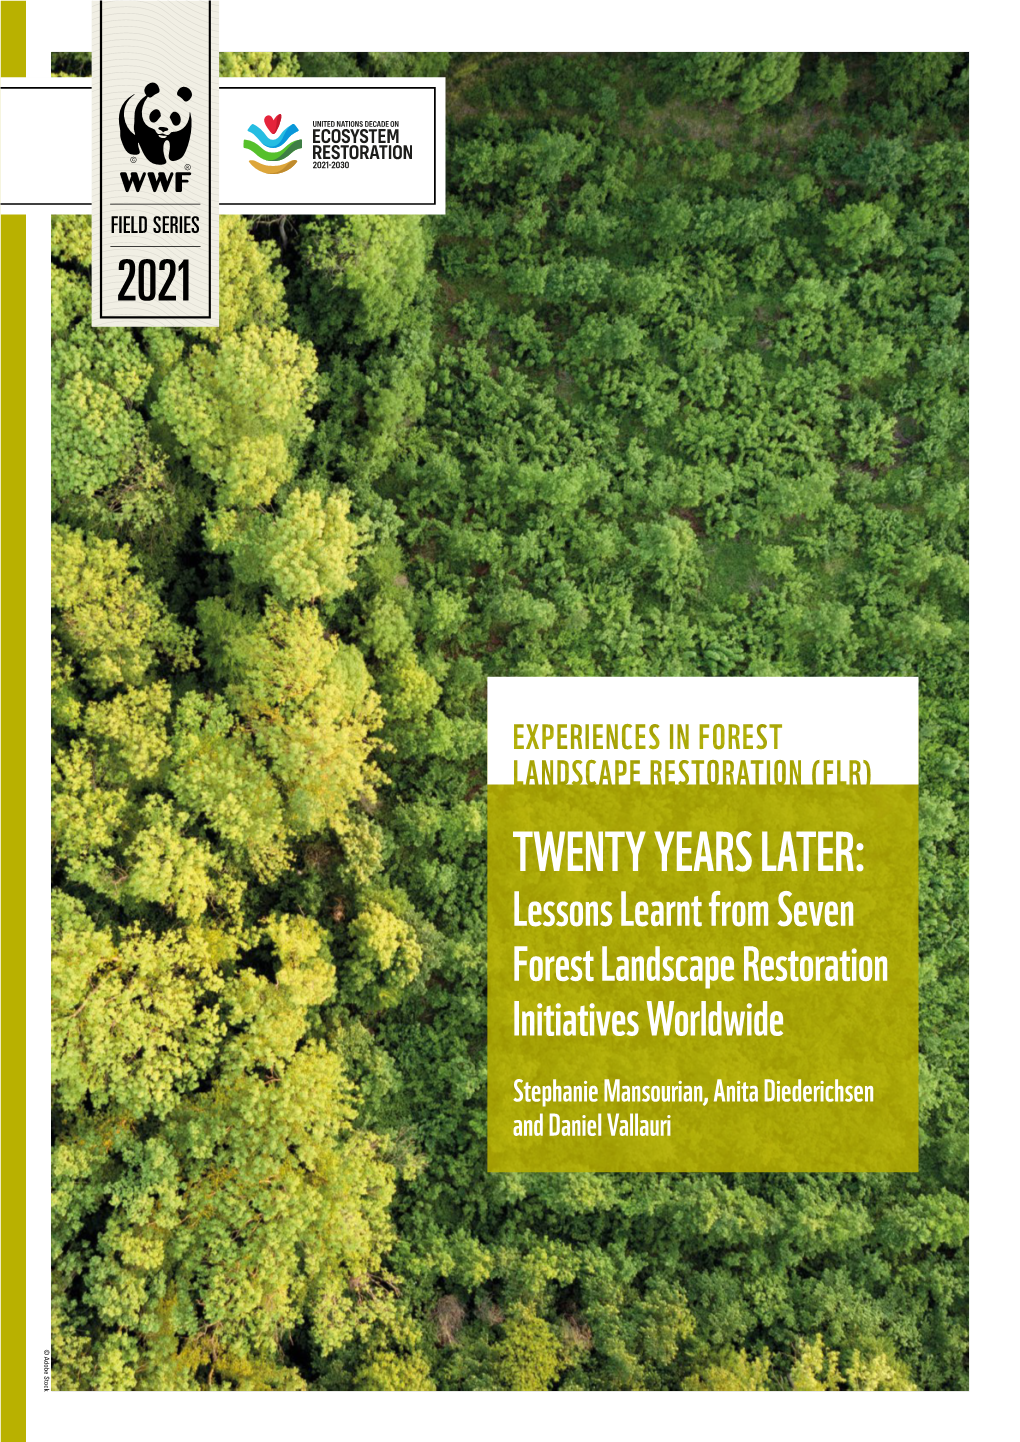 TWENTY YEARS LATER: Lessons Learnt from Seven Forest Landscape Restoration Initiatives Worldwide